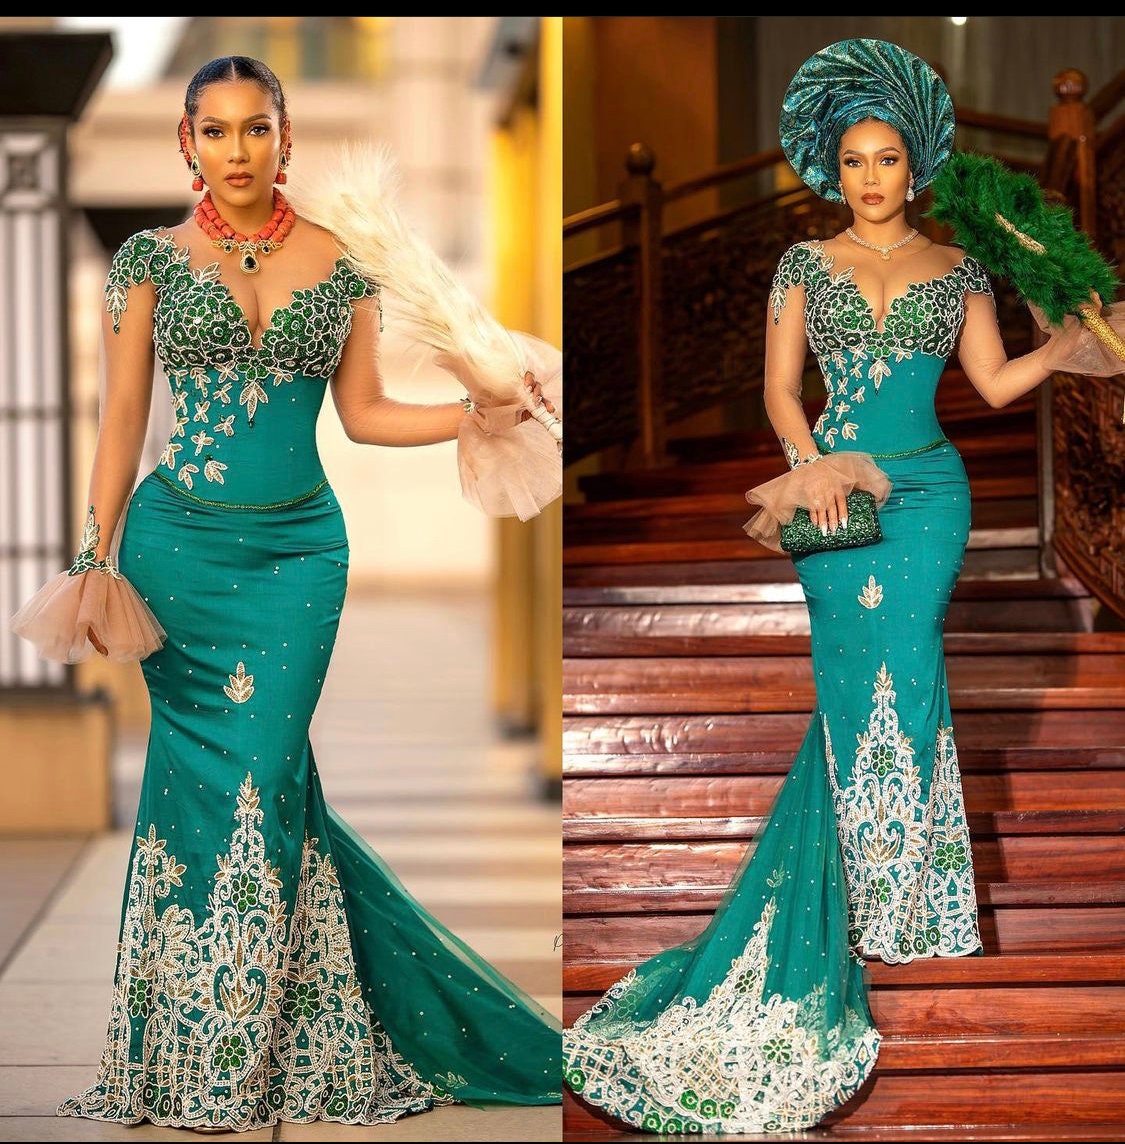 40 Gorgeous Wedding Dress Styles For Your African Traditional